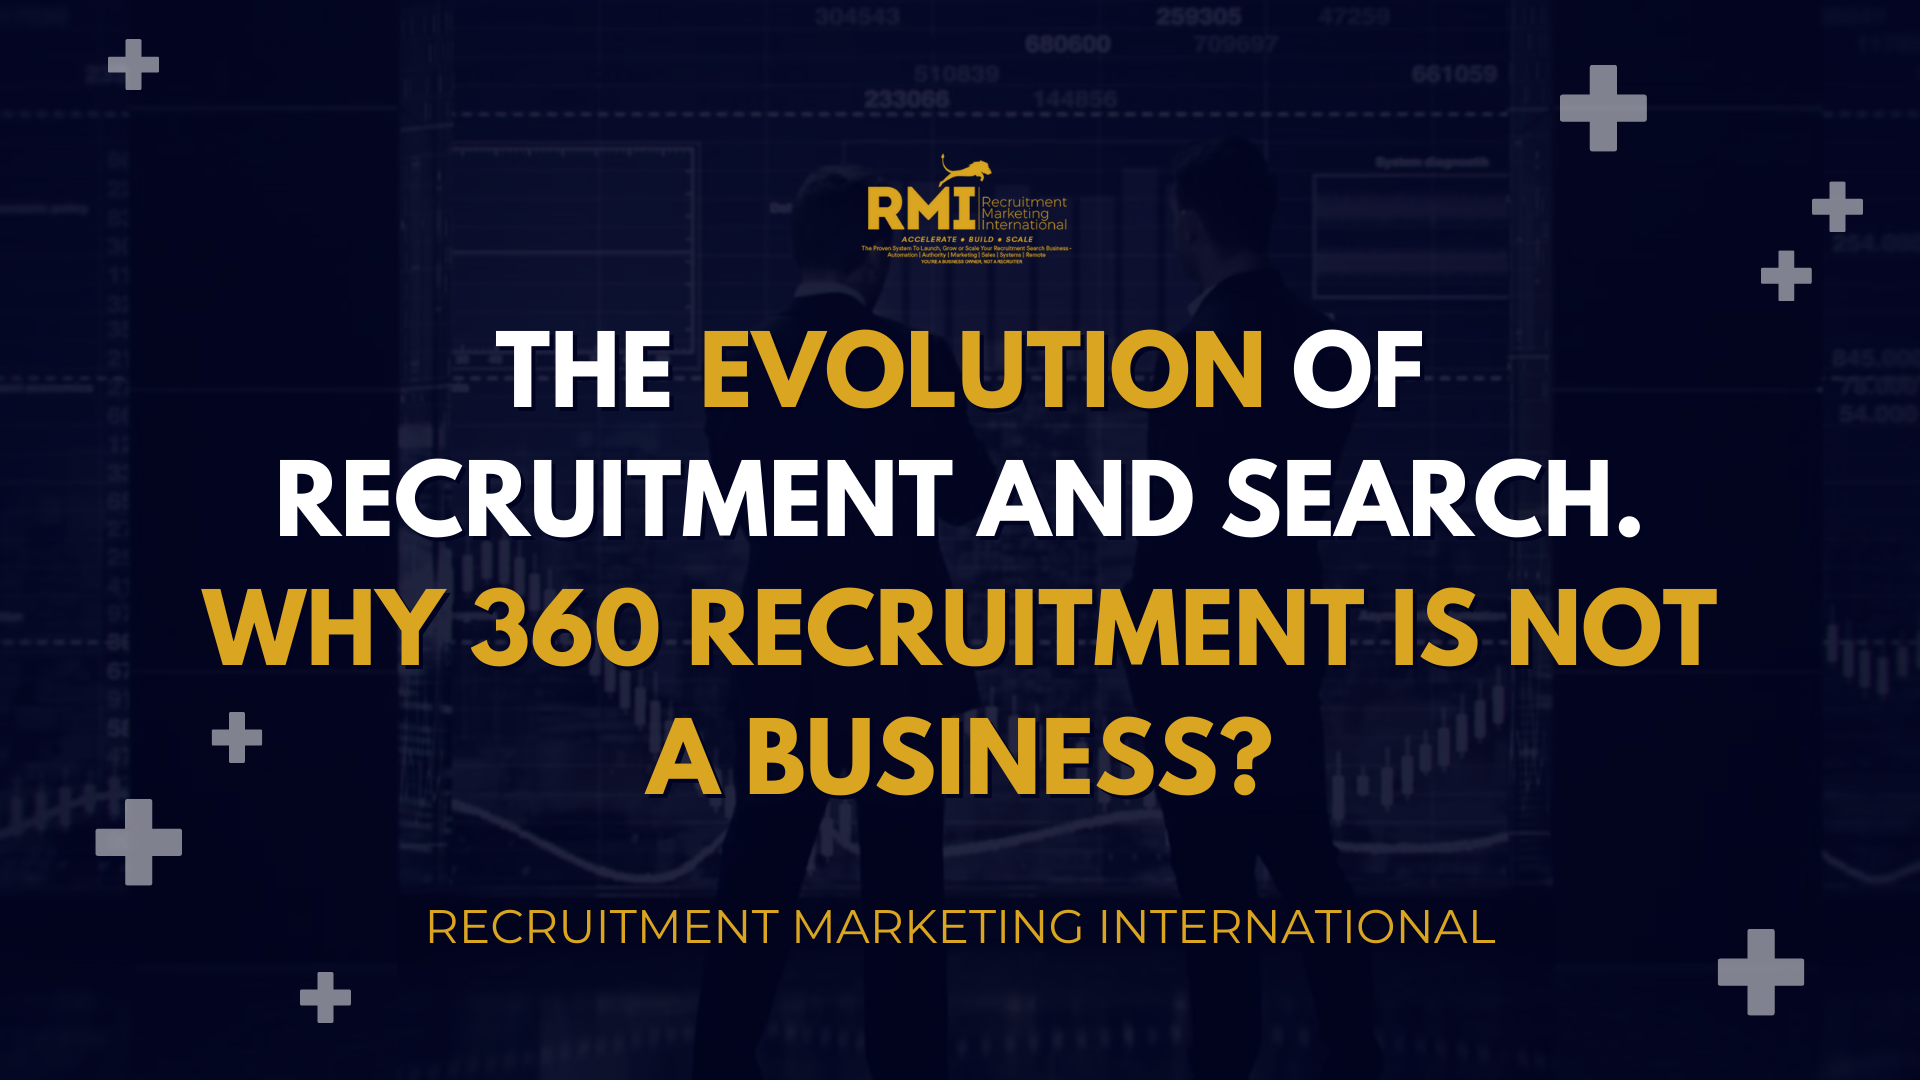 PODCAST 223 – THE EVOLUTION OF RECRUITMENT AND SEARCH – WHY 360 RECRUITMENT IS NOT A BUSINESS?